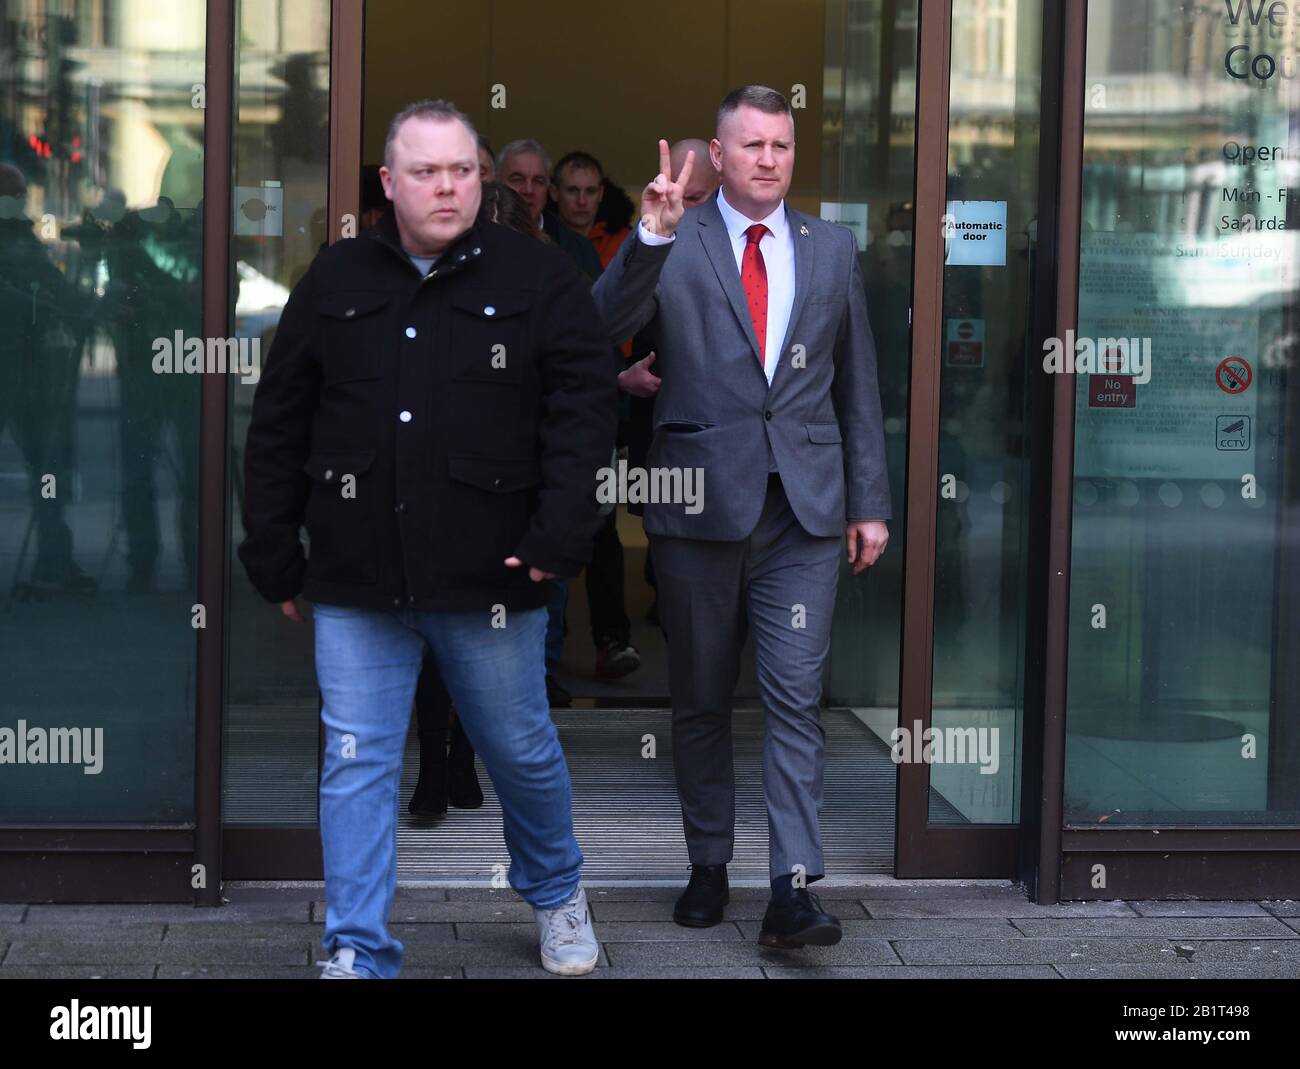 Britain First leader Paul Golding outside Westminster Magistrates' Court, London, where he was charged with failing to comply with a duty under schedule 7 of the Terrorism Act after refusing to give counter-terror officers access to his electronic devices when he was stopped at Heathrow Airport on his way home from a trip to Russia to see the parliament. PA Photo. Picture date: Thursday February 27, 2020. See PA story COURTS Golding. Photo credit should read: Victoria Jones/PA Wire Stock Photo